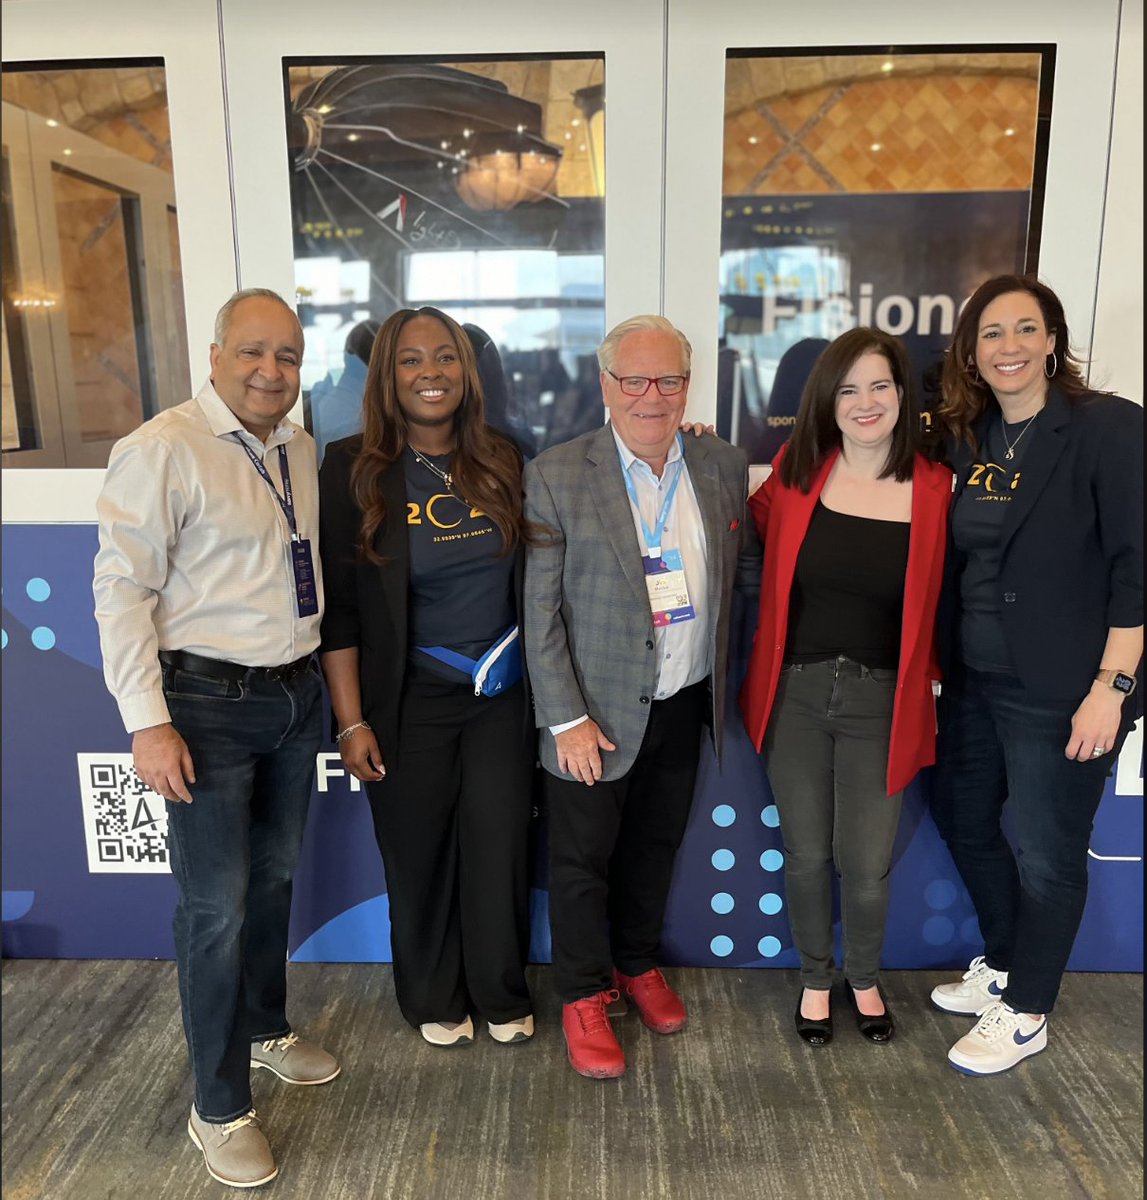 What a treat this year at #AlkamiColab, @JimMarous filming our FIsionaries podcast LIVE!! We can't wait to see the new episodes. Special shout-out to Alkamist Courtney Tyes, our FIsionaries Podcast manager, for arranging this incredible experience. #FIsionaries #Podcast